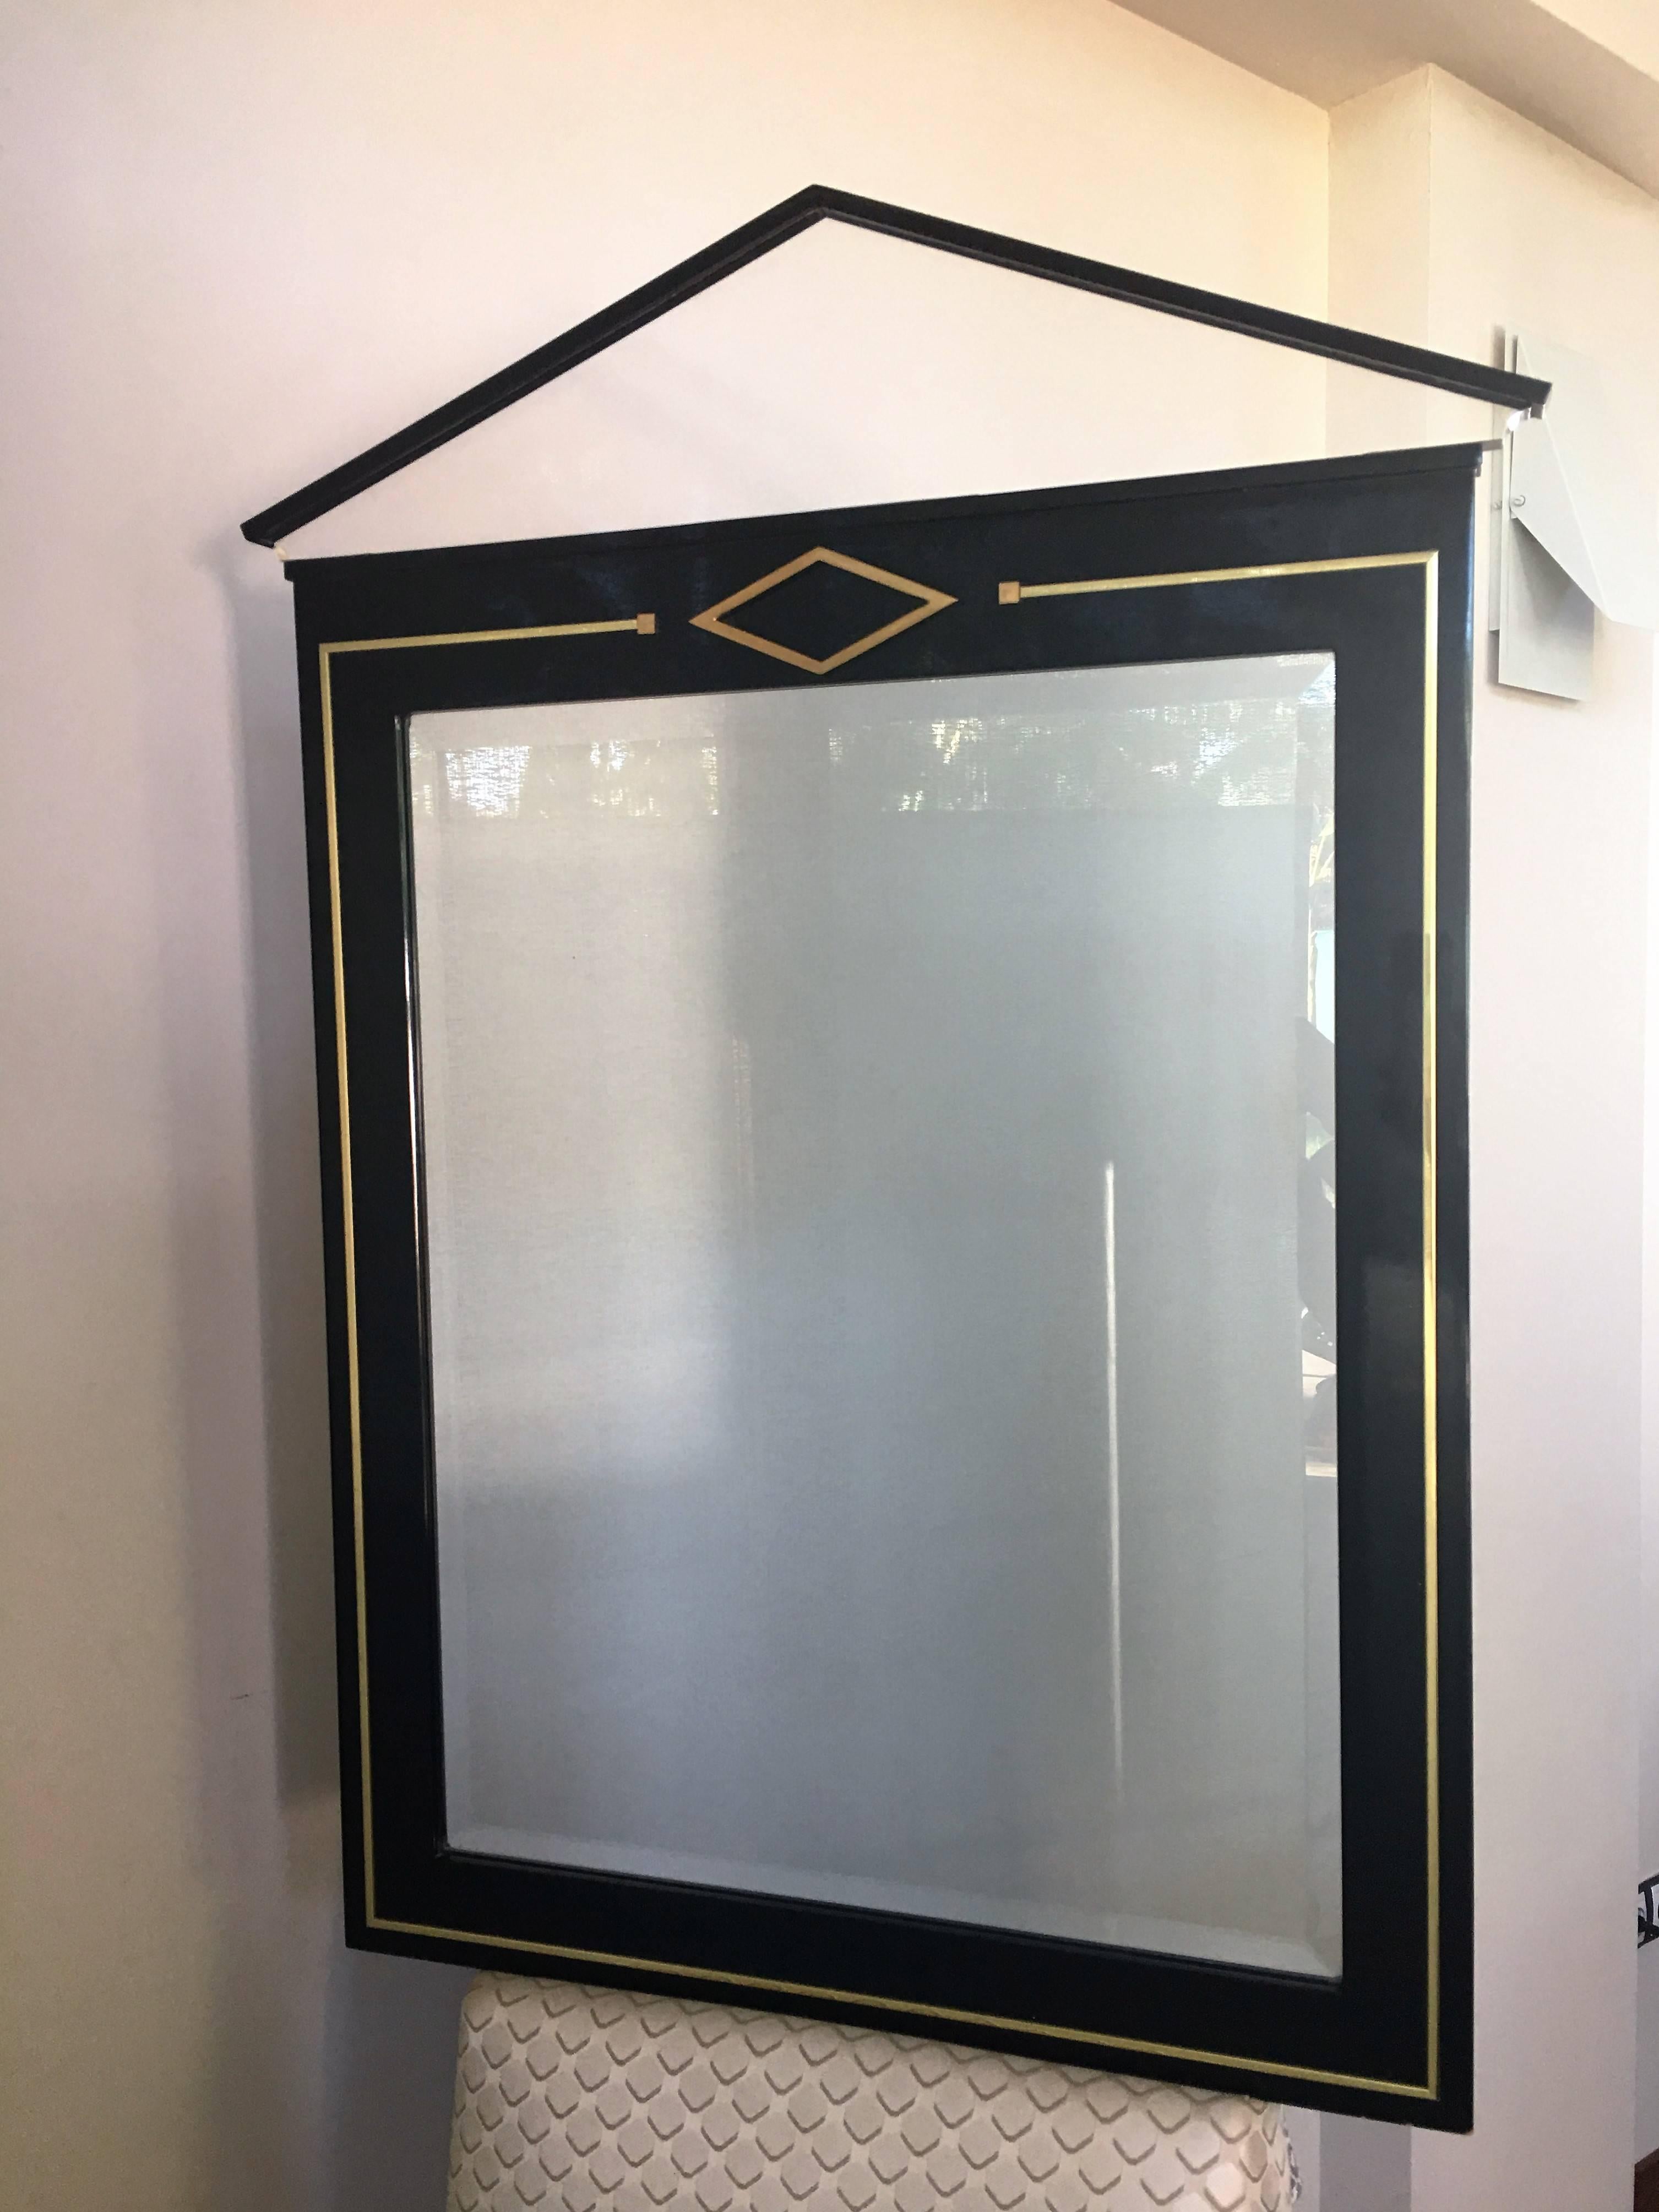 Art Deco Machine Age mirror with inset black vitrolite glass and chrome mounts.
The top is made of Lucite.